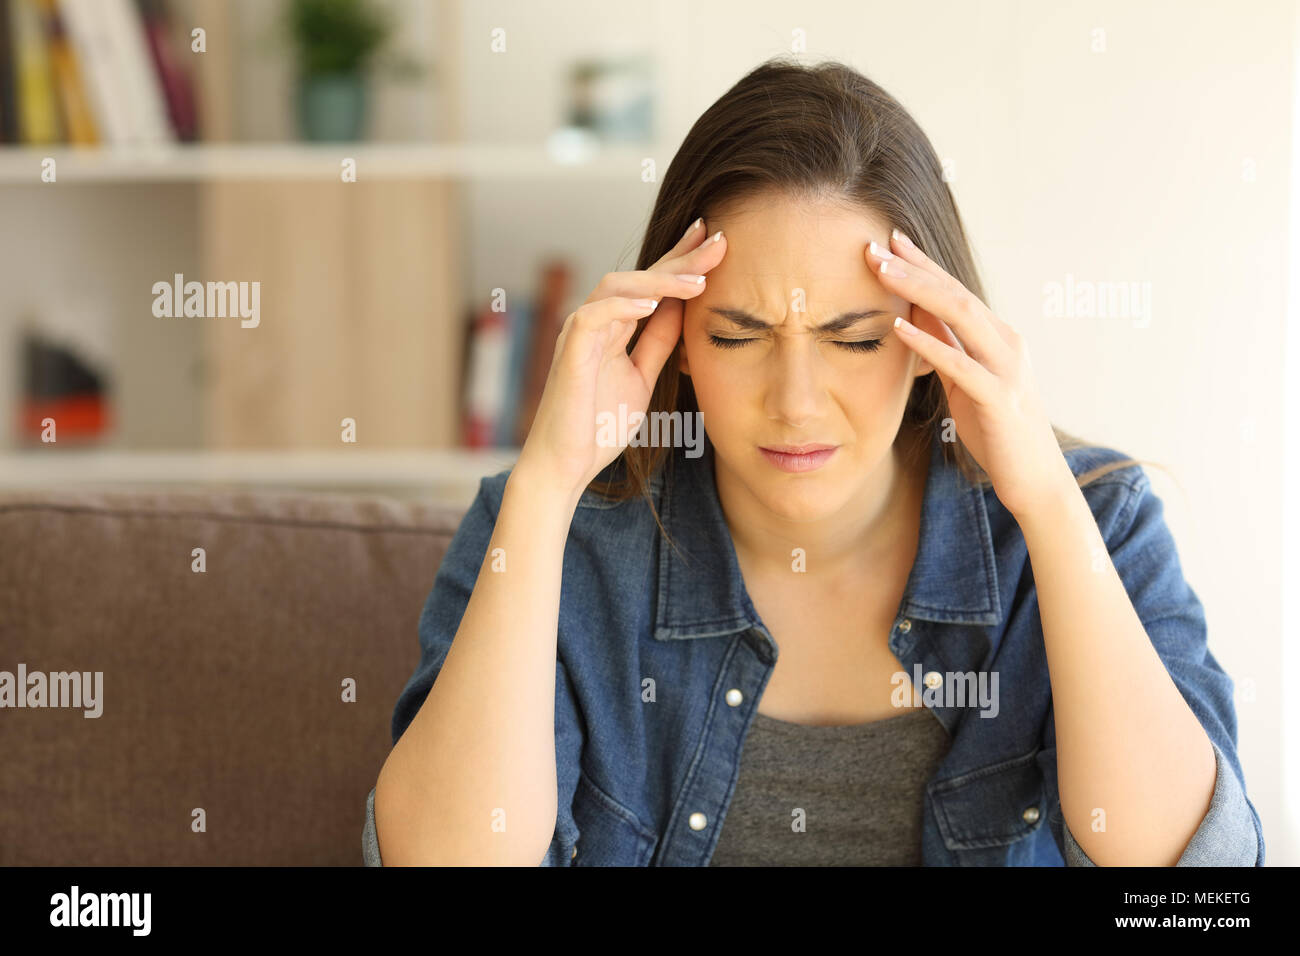 Front view portrait of a woman complaining suffering migraine sitting on a couch in the living room at home Stock Photo